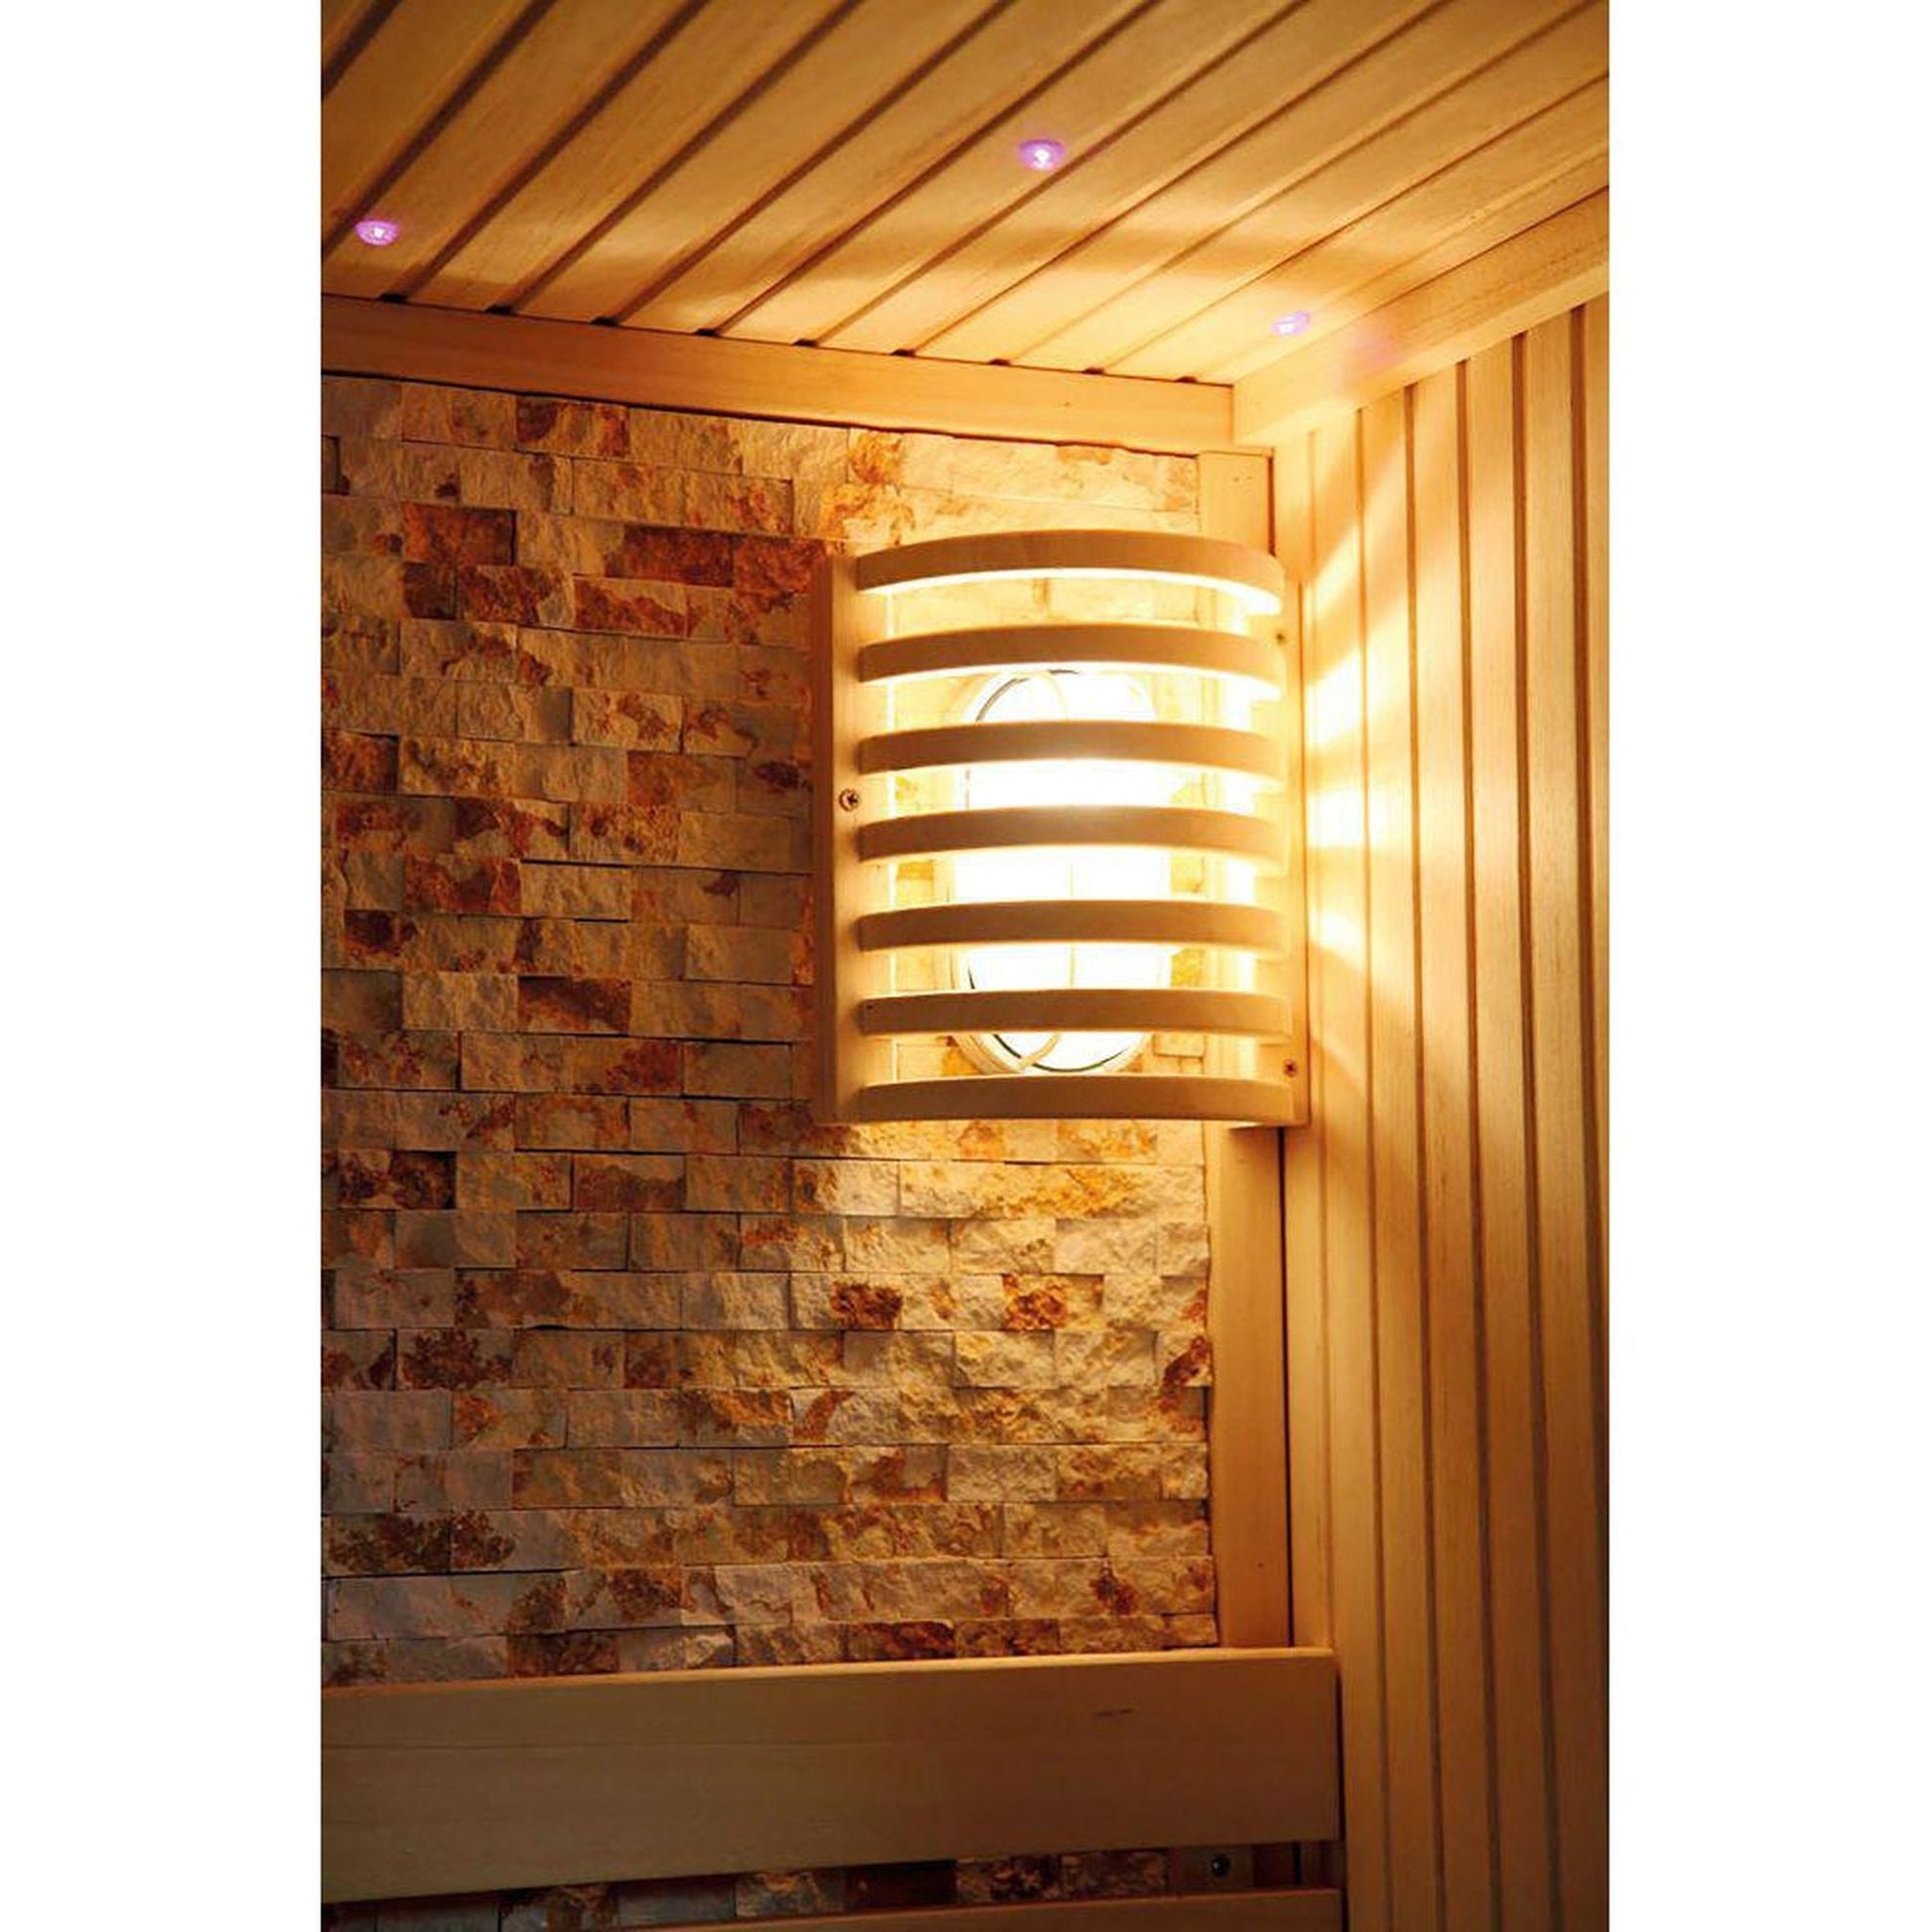 SunRay Rockledge 2-Person Luxury Indoor Traditional Sauna With Harvia Heater & Digital Controls